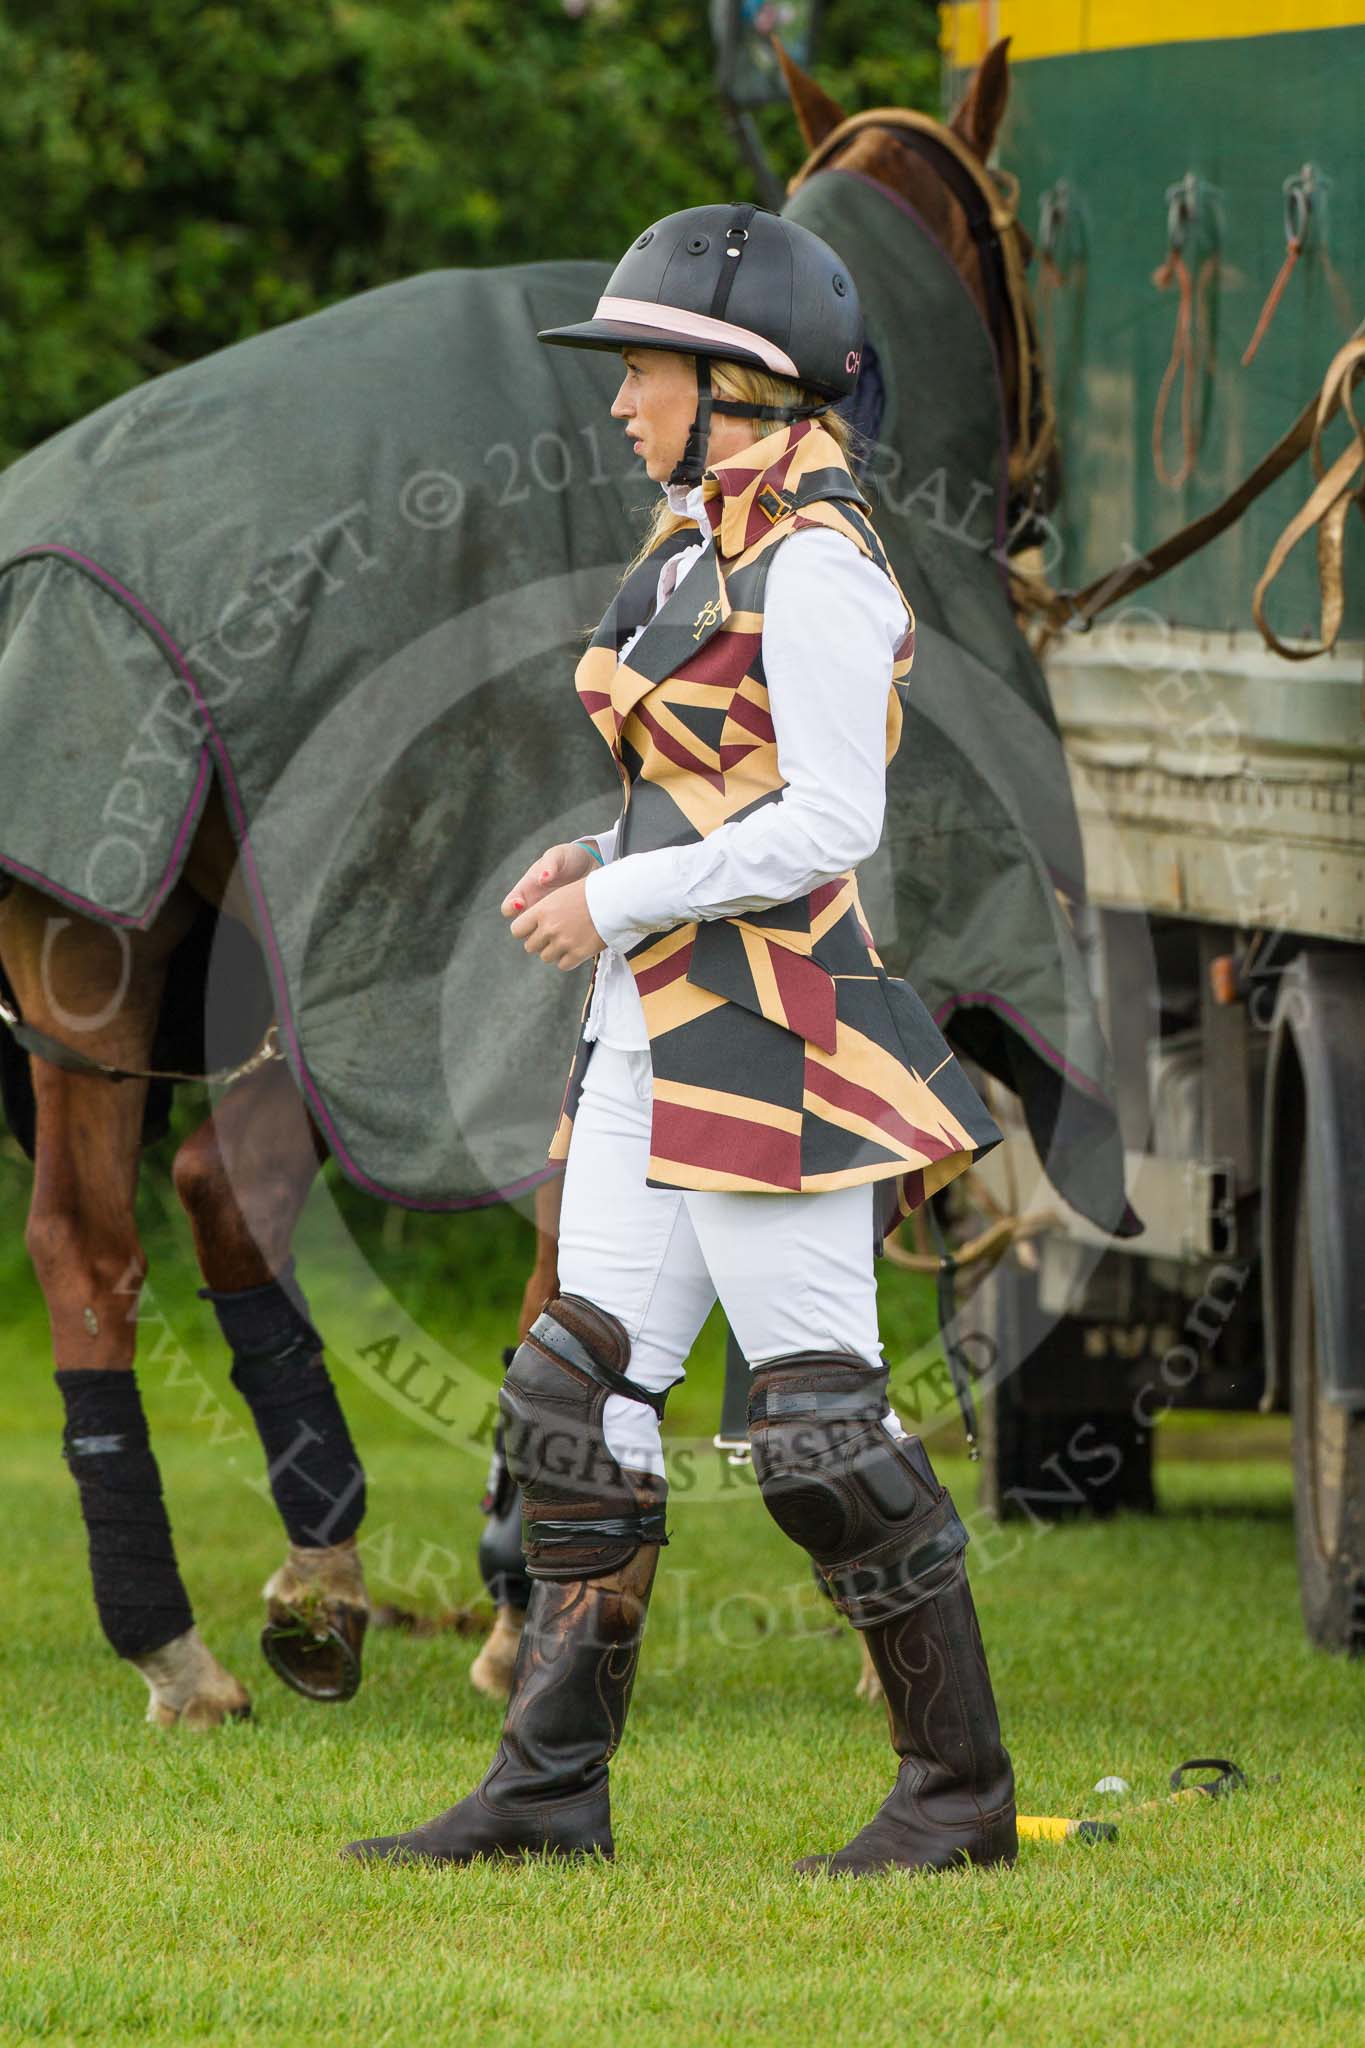 7th Heritage Polo Cup semi-finals: Charlie Howell, Liberty Freedom - Ladies of the British Empire..
Hurtwood Park Polo Club,
Ewhurst Green,
Surrey,
United Kingdom,
on 04 August 2012 at 12:55, image #85